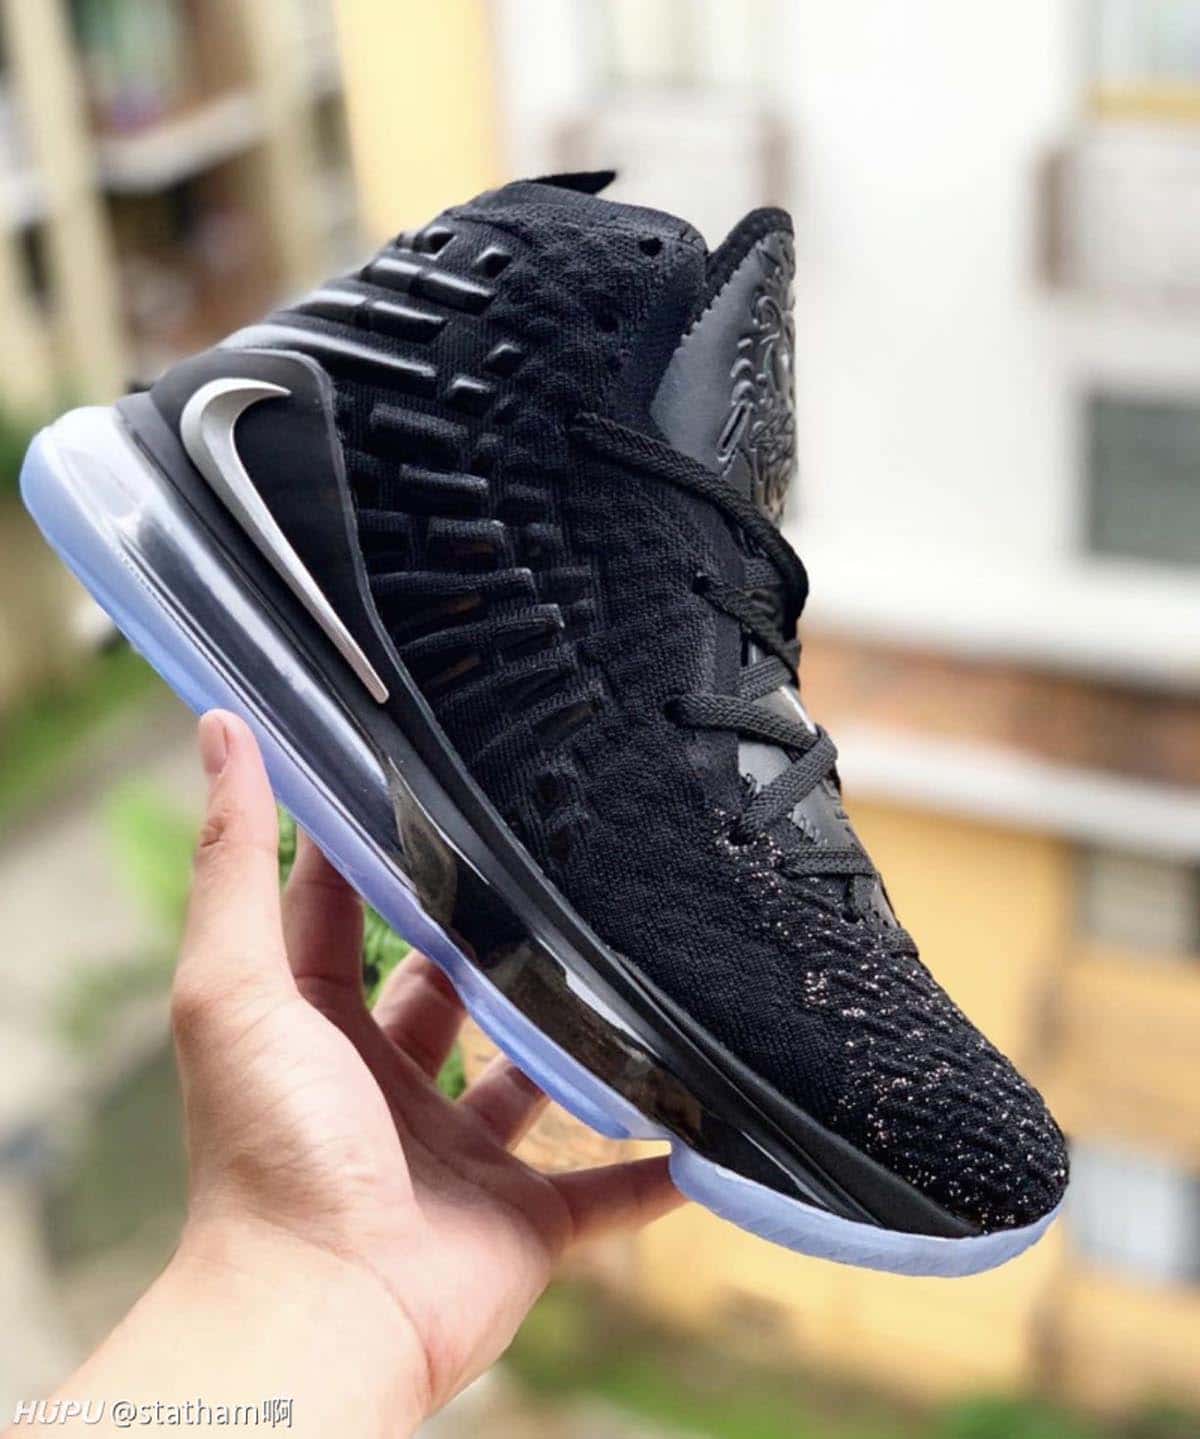 Our Best Look Yet at the Nike LeBron 17 